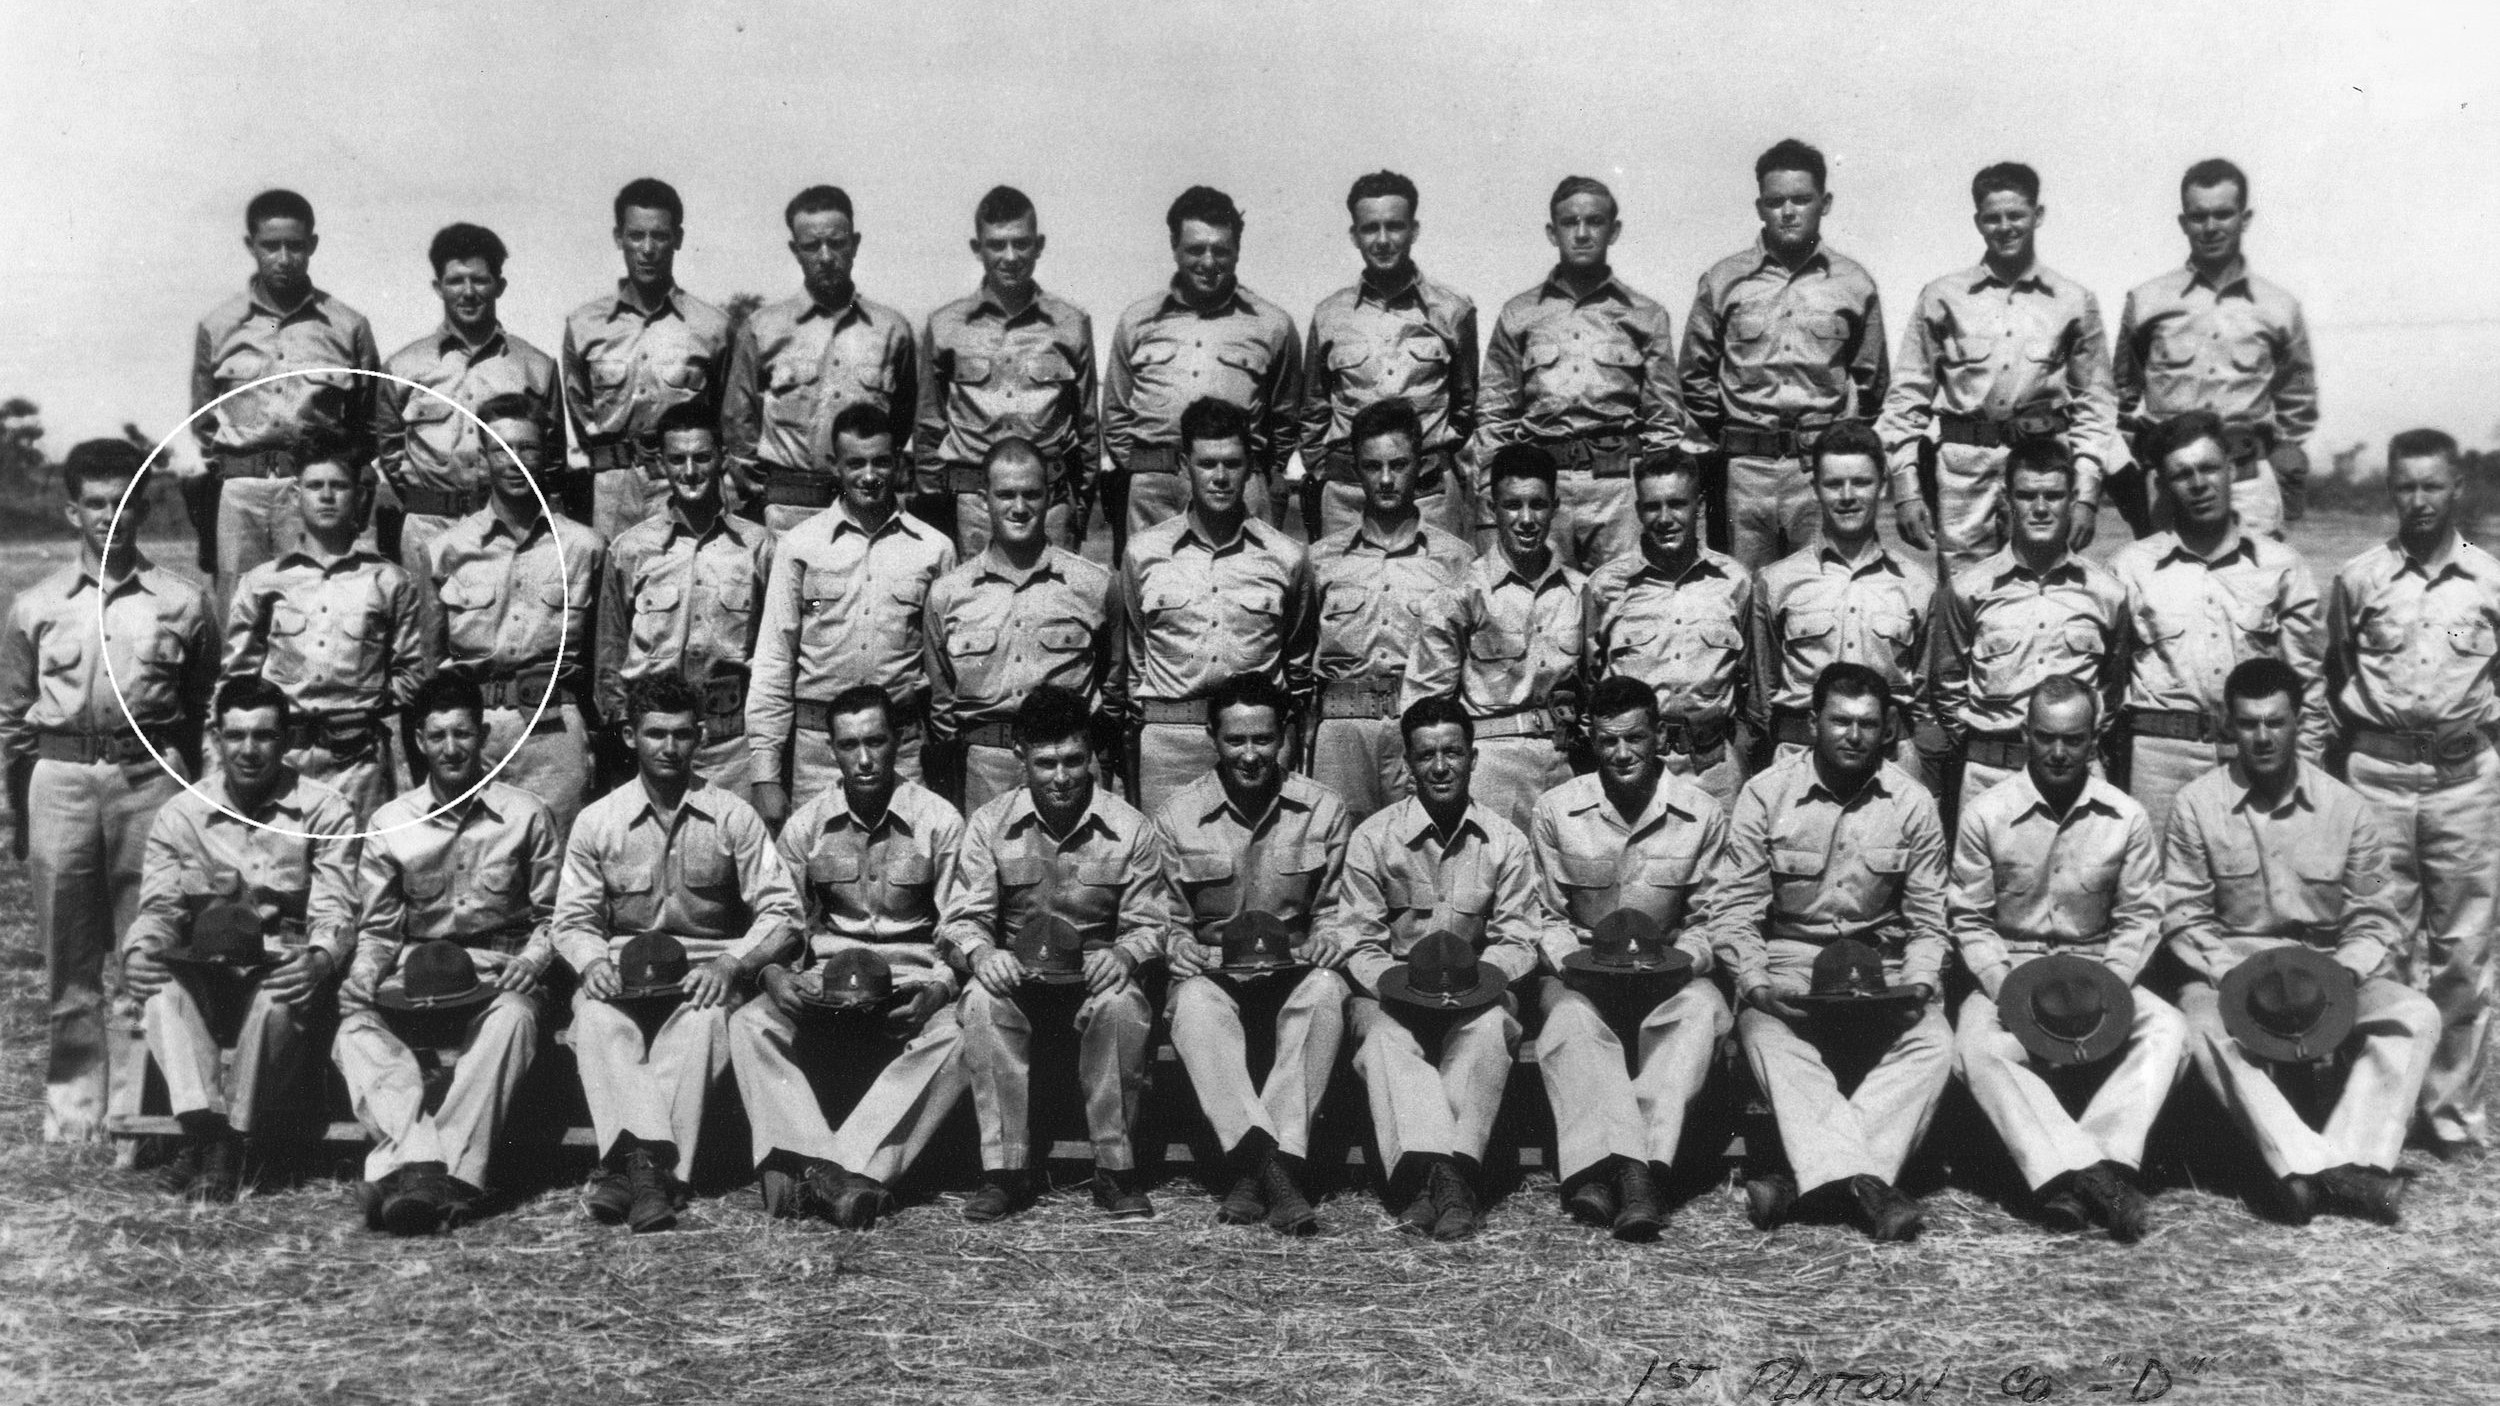 15-year-old Joe Johnson (circled) shown as a member of Company D, 31st Infantry Regiment, at Fort McKinley, Manila. He stood 5’ 7” and weighed 135 lbs. in 1941.